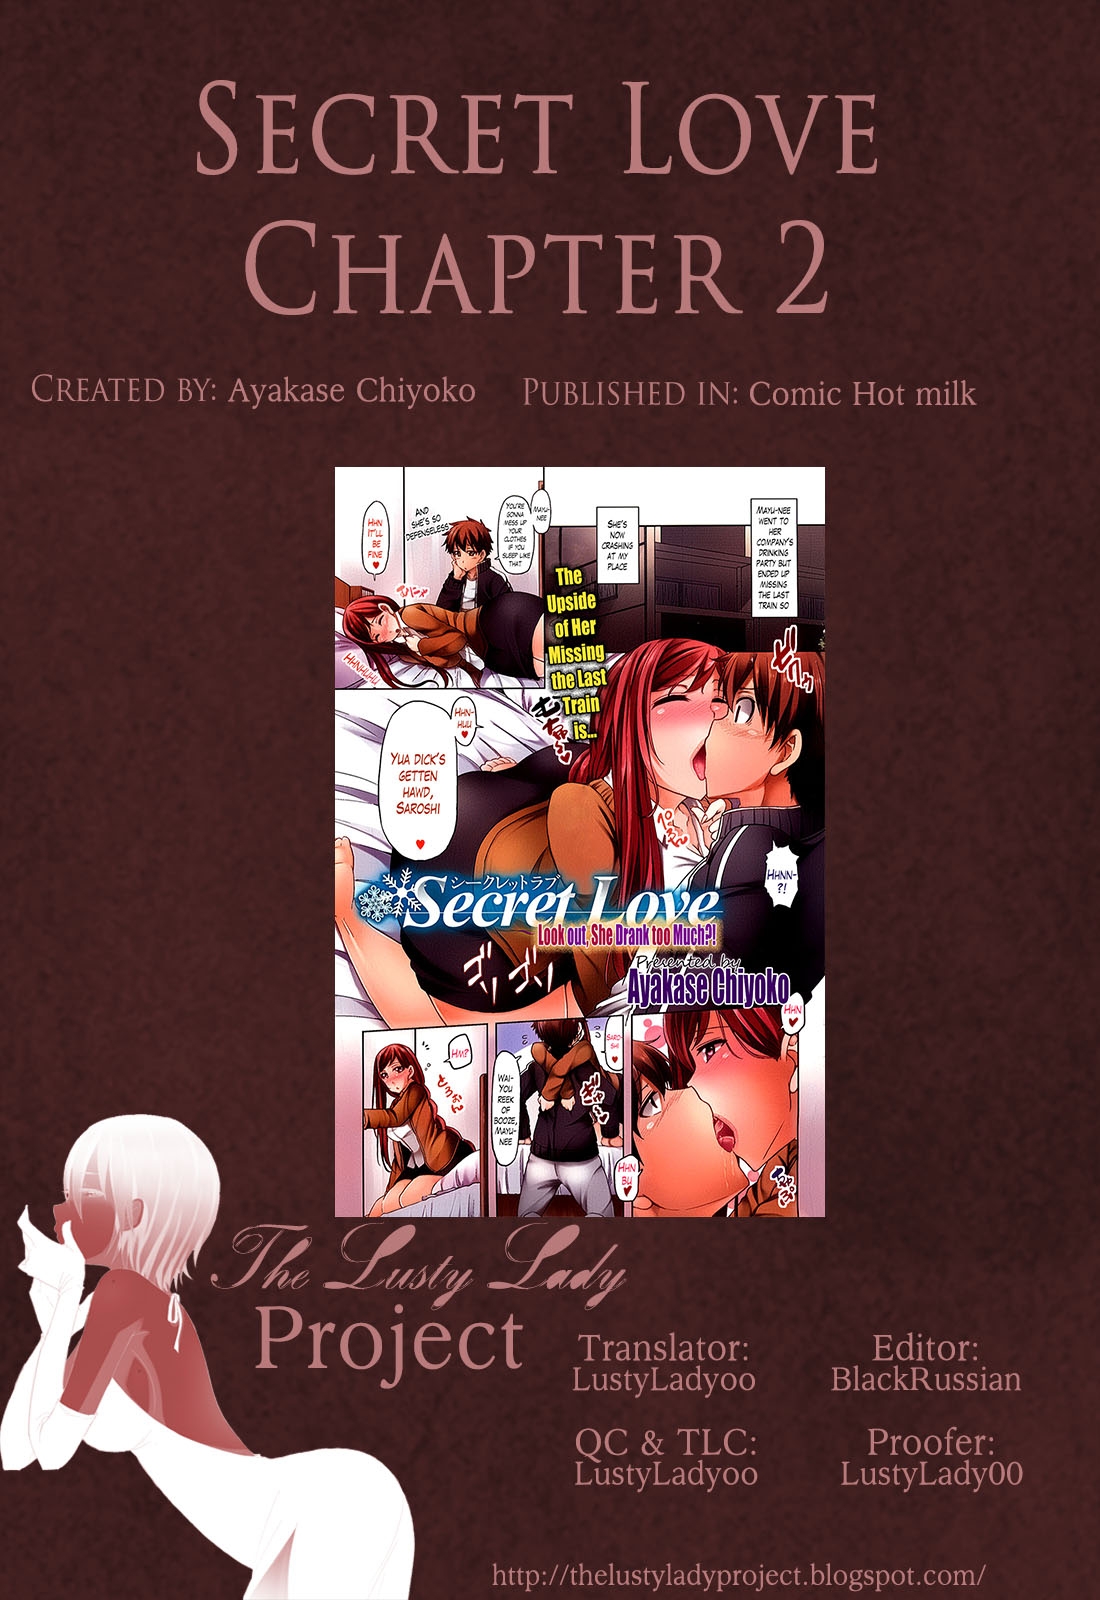 [Ayakase Chiyoko] Secret Love Ch.1 + Extra Ch.2+ 3 (Comic Hot Milk)[ENG][The Lusty Lady Project] 23